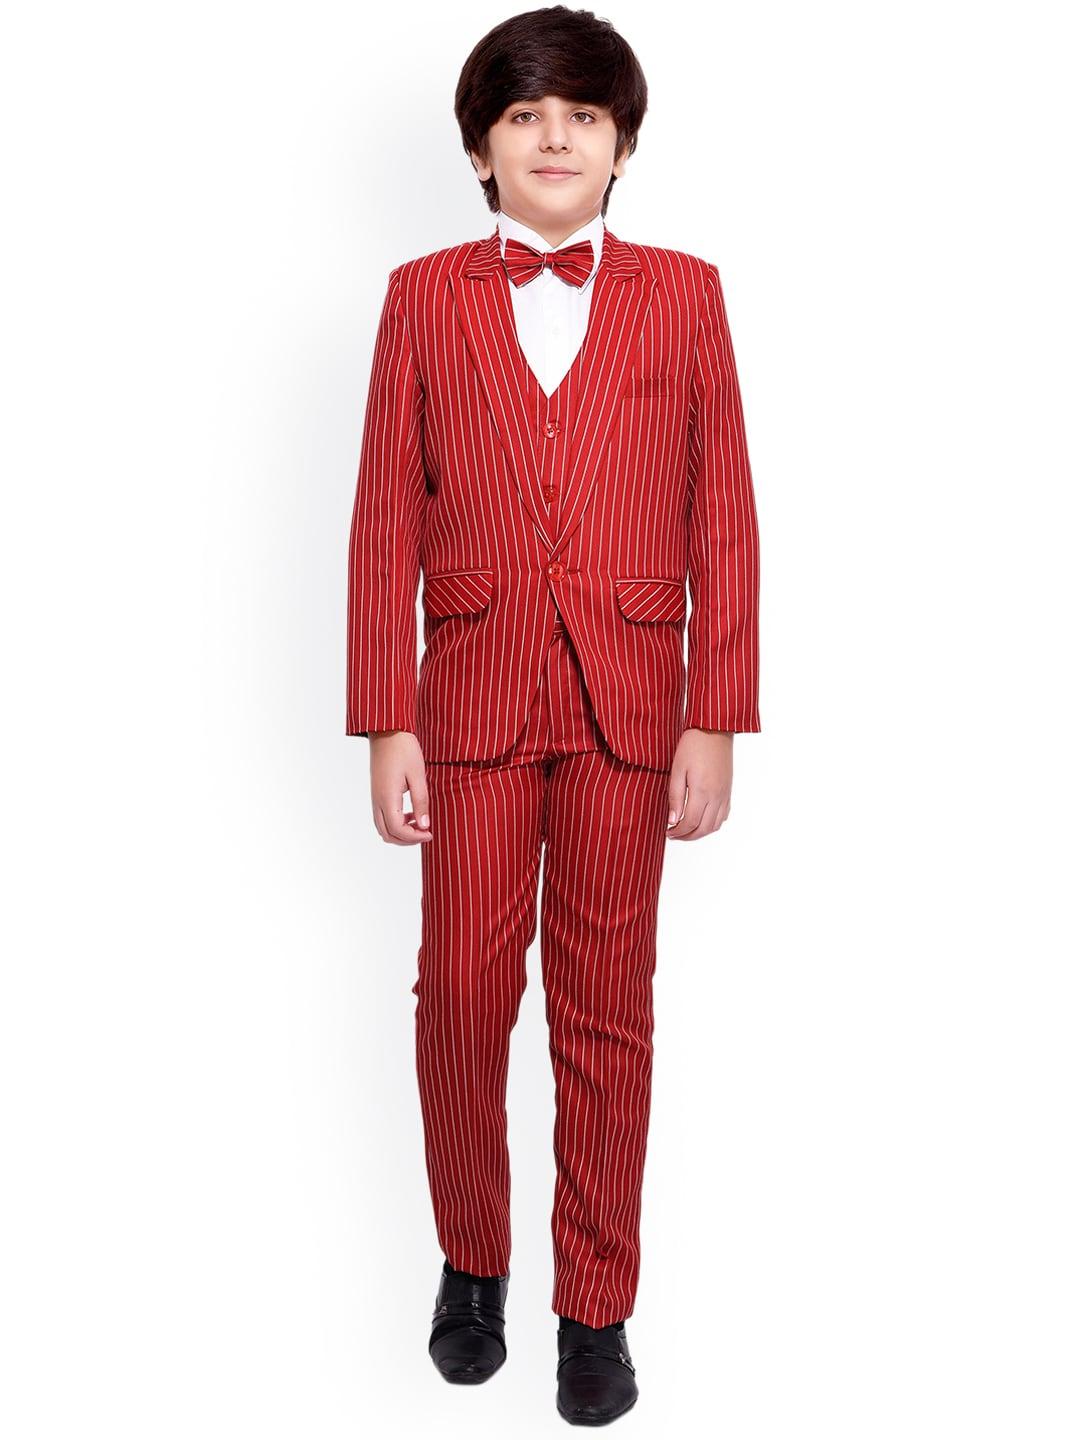 jeetethnics boys red & white striped single-breasted suit 5-piece